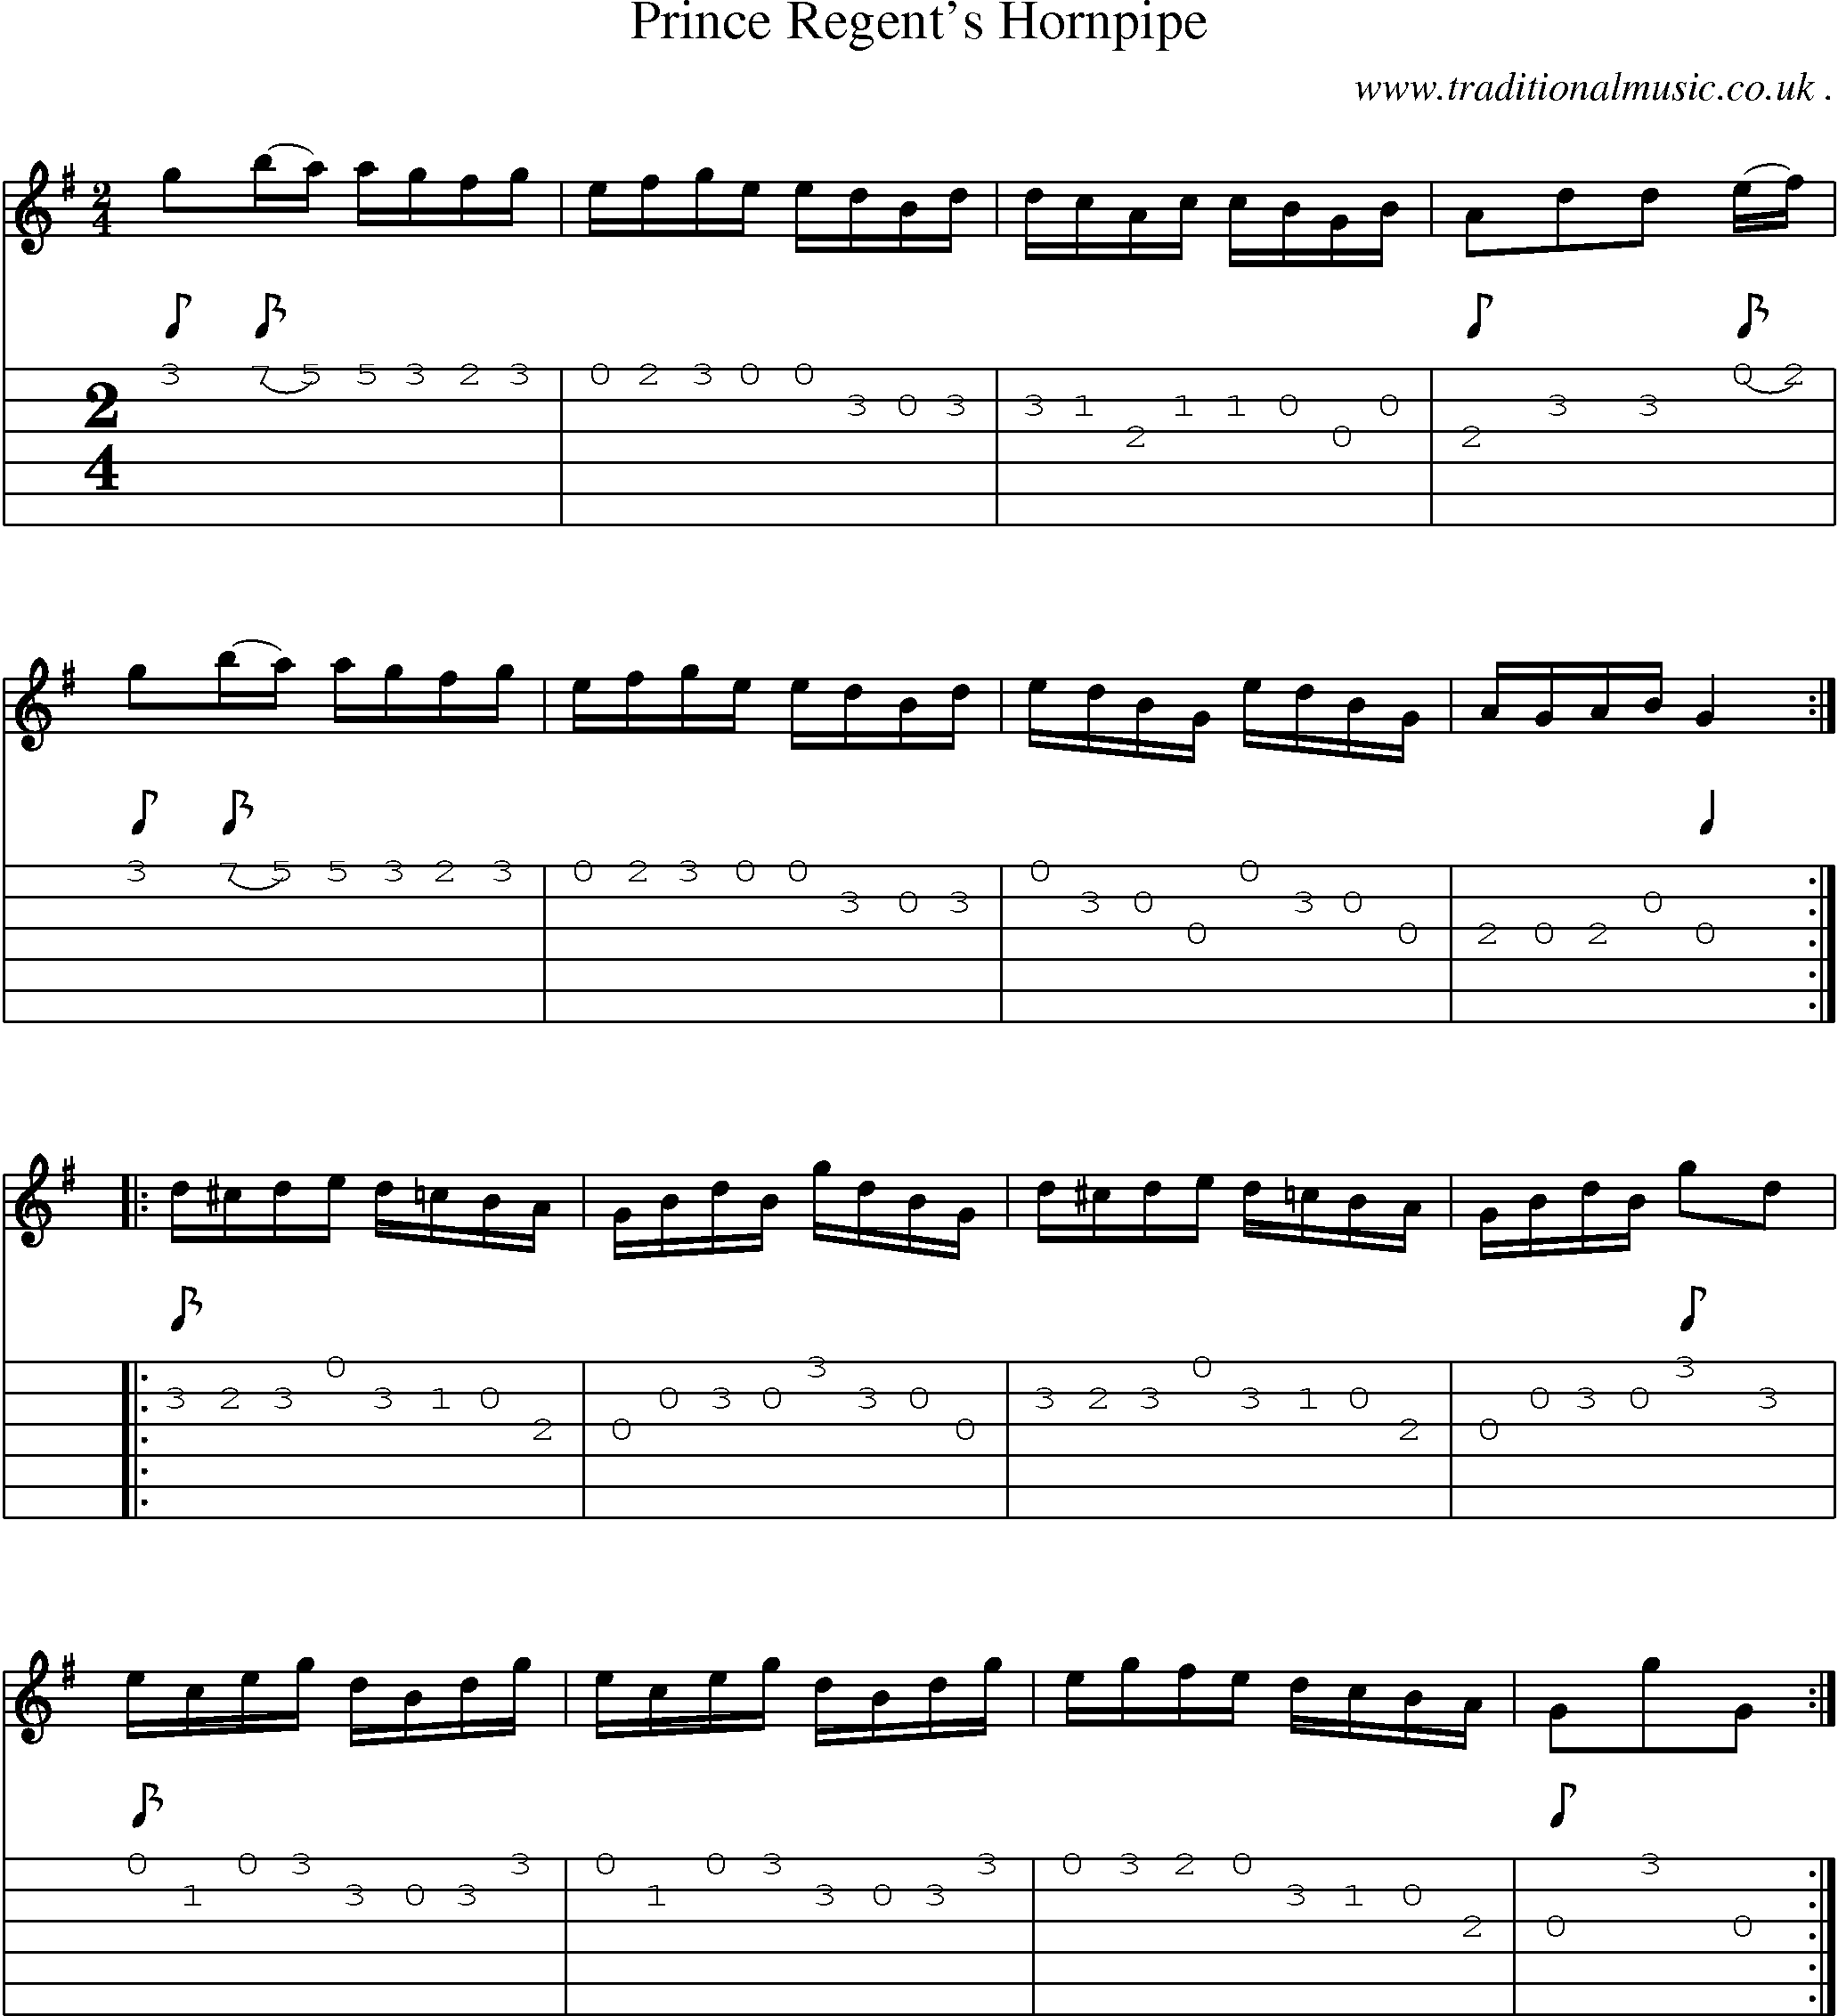 Sheet-Music and Guitar Tabs for Prince Regents Hornpipe